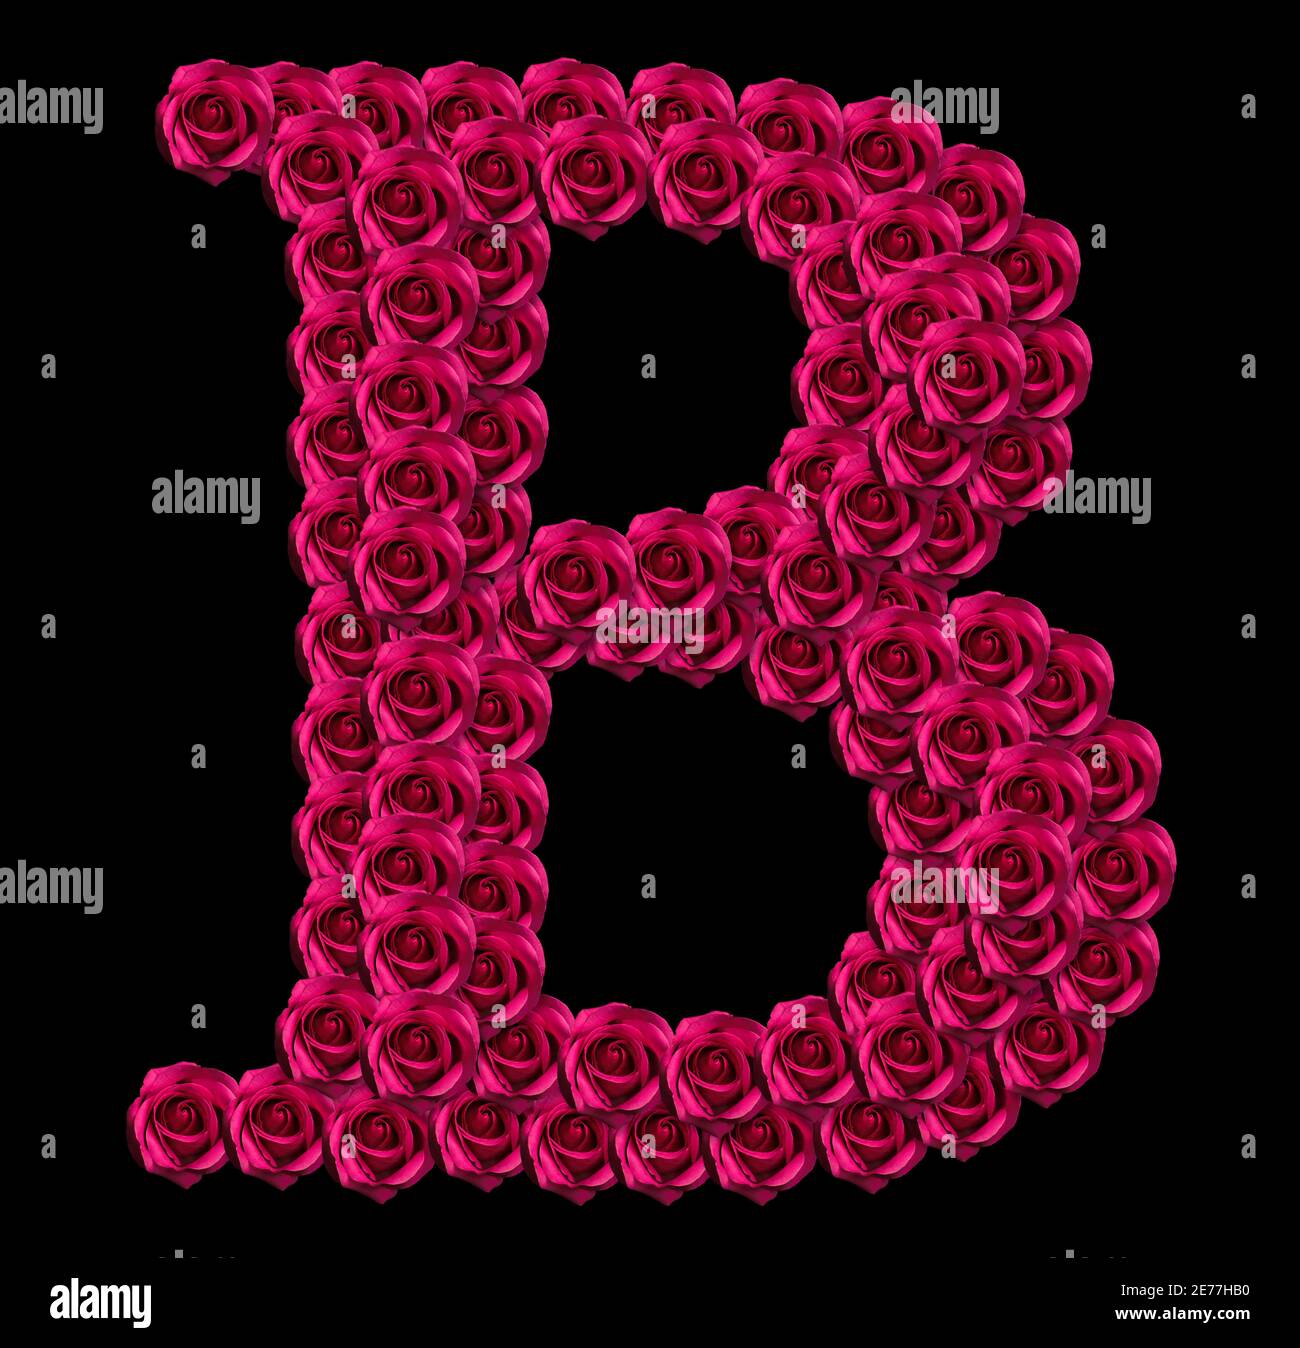 romantic concept image of a capital letter B made of red roses. Isolated on black background. Design element for love or valentines themes Stock Photo